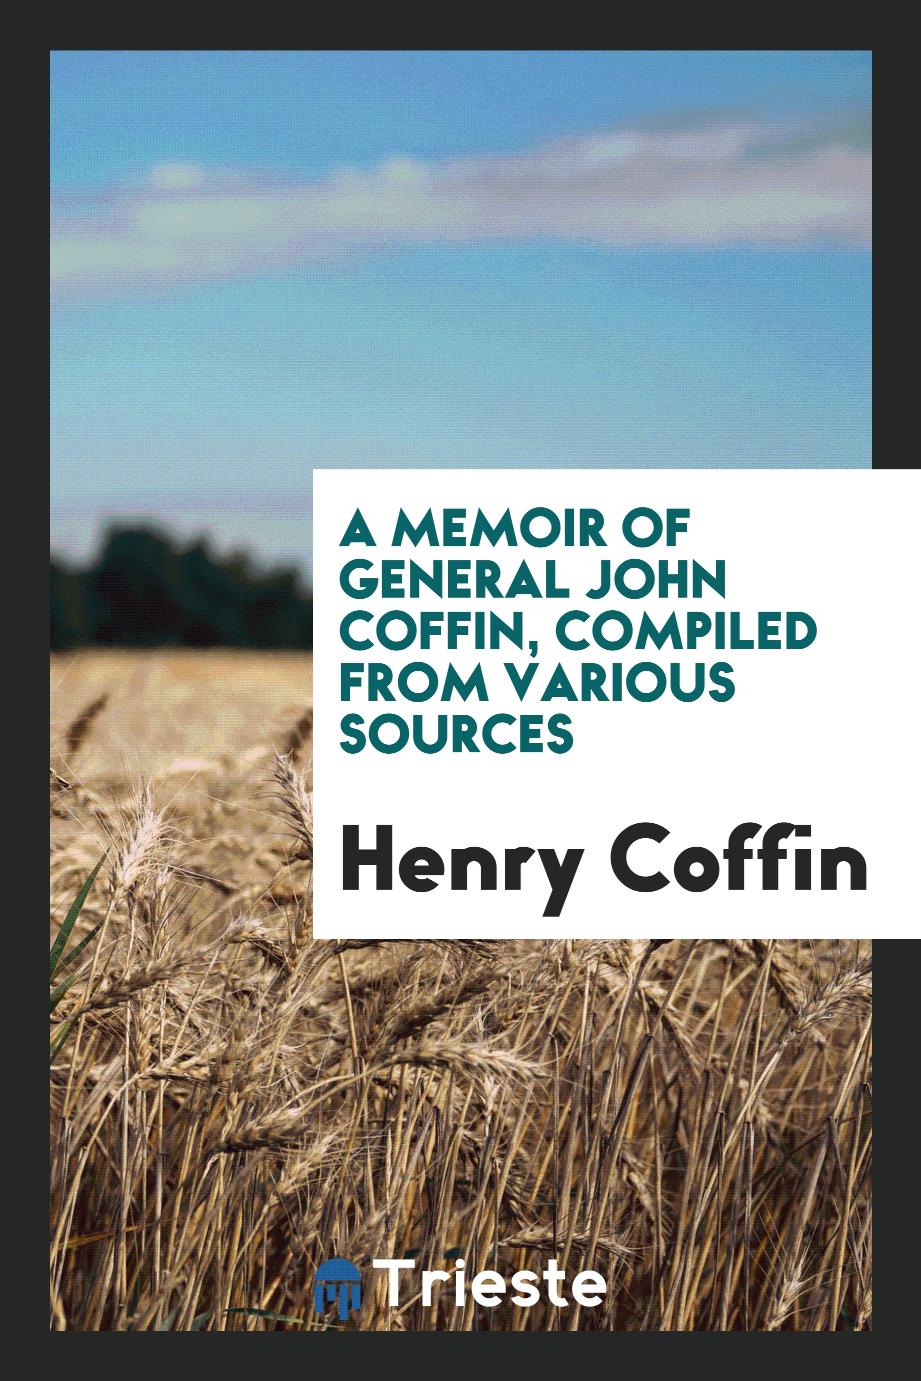 A Memoir of General John Coffin, compiled from various sources